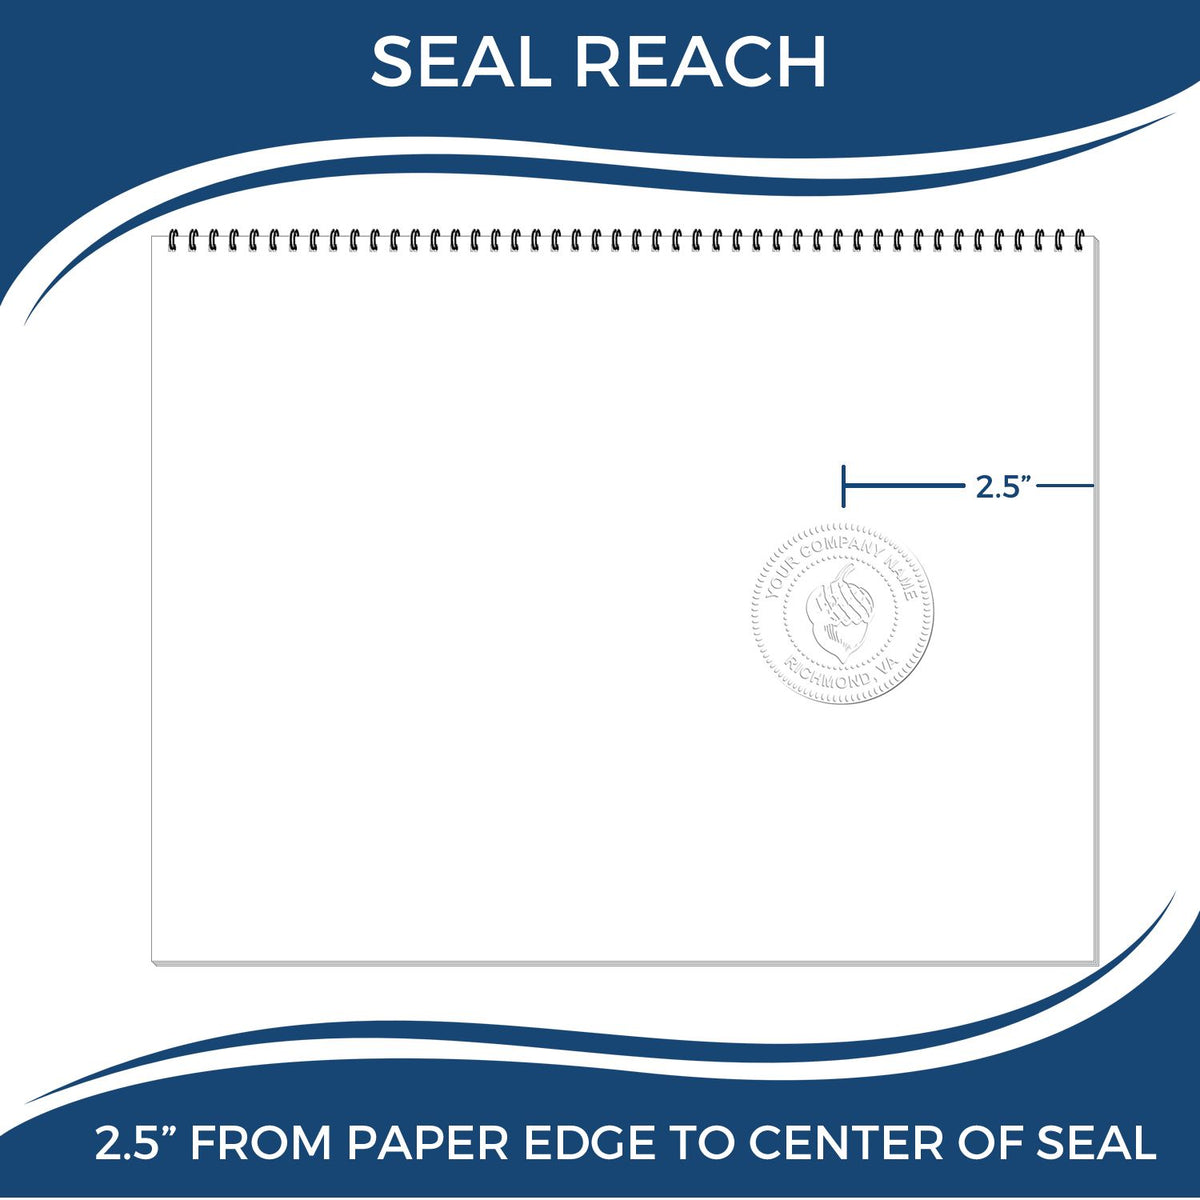 An infographic showing the seal reach which is represented by a ruler and a miniature seal image of the Long Reach Maryland PE Seal